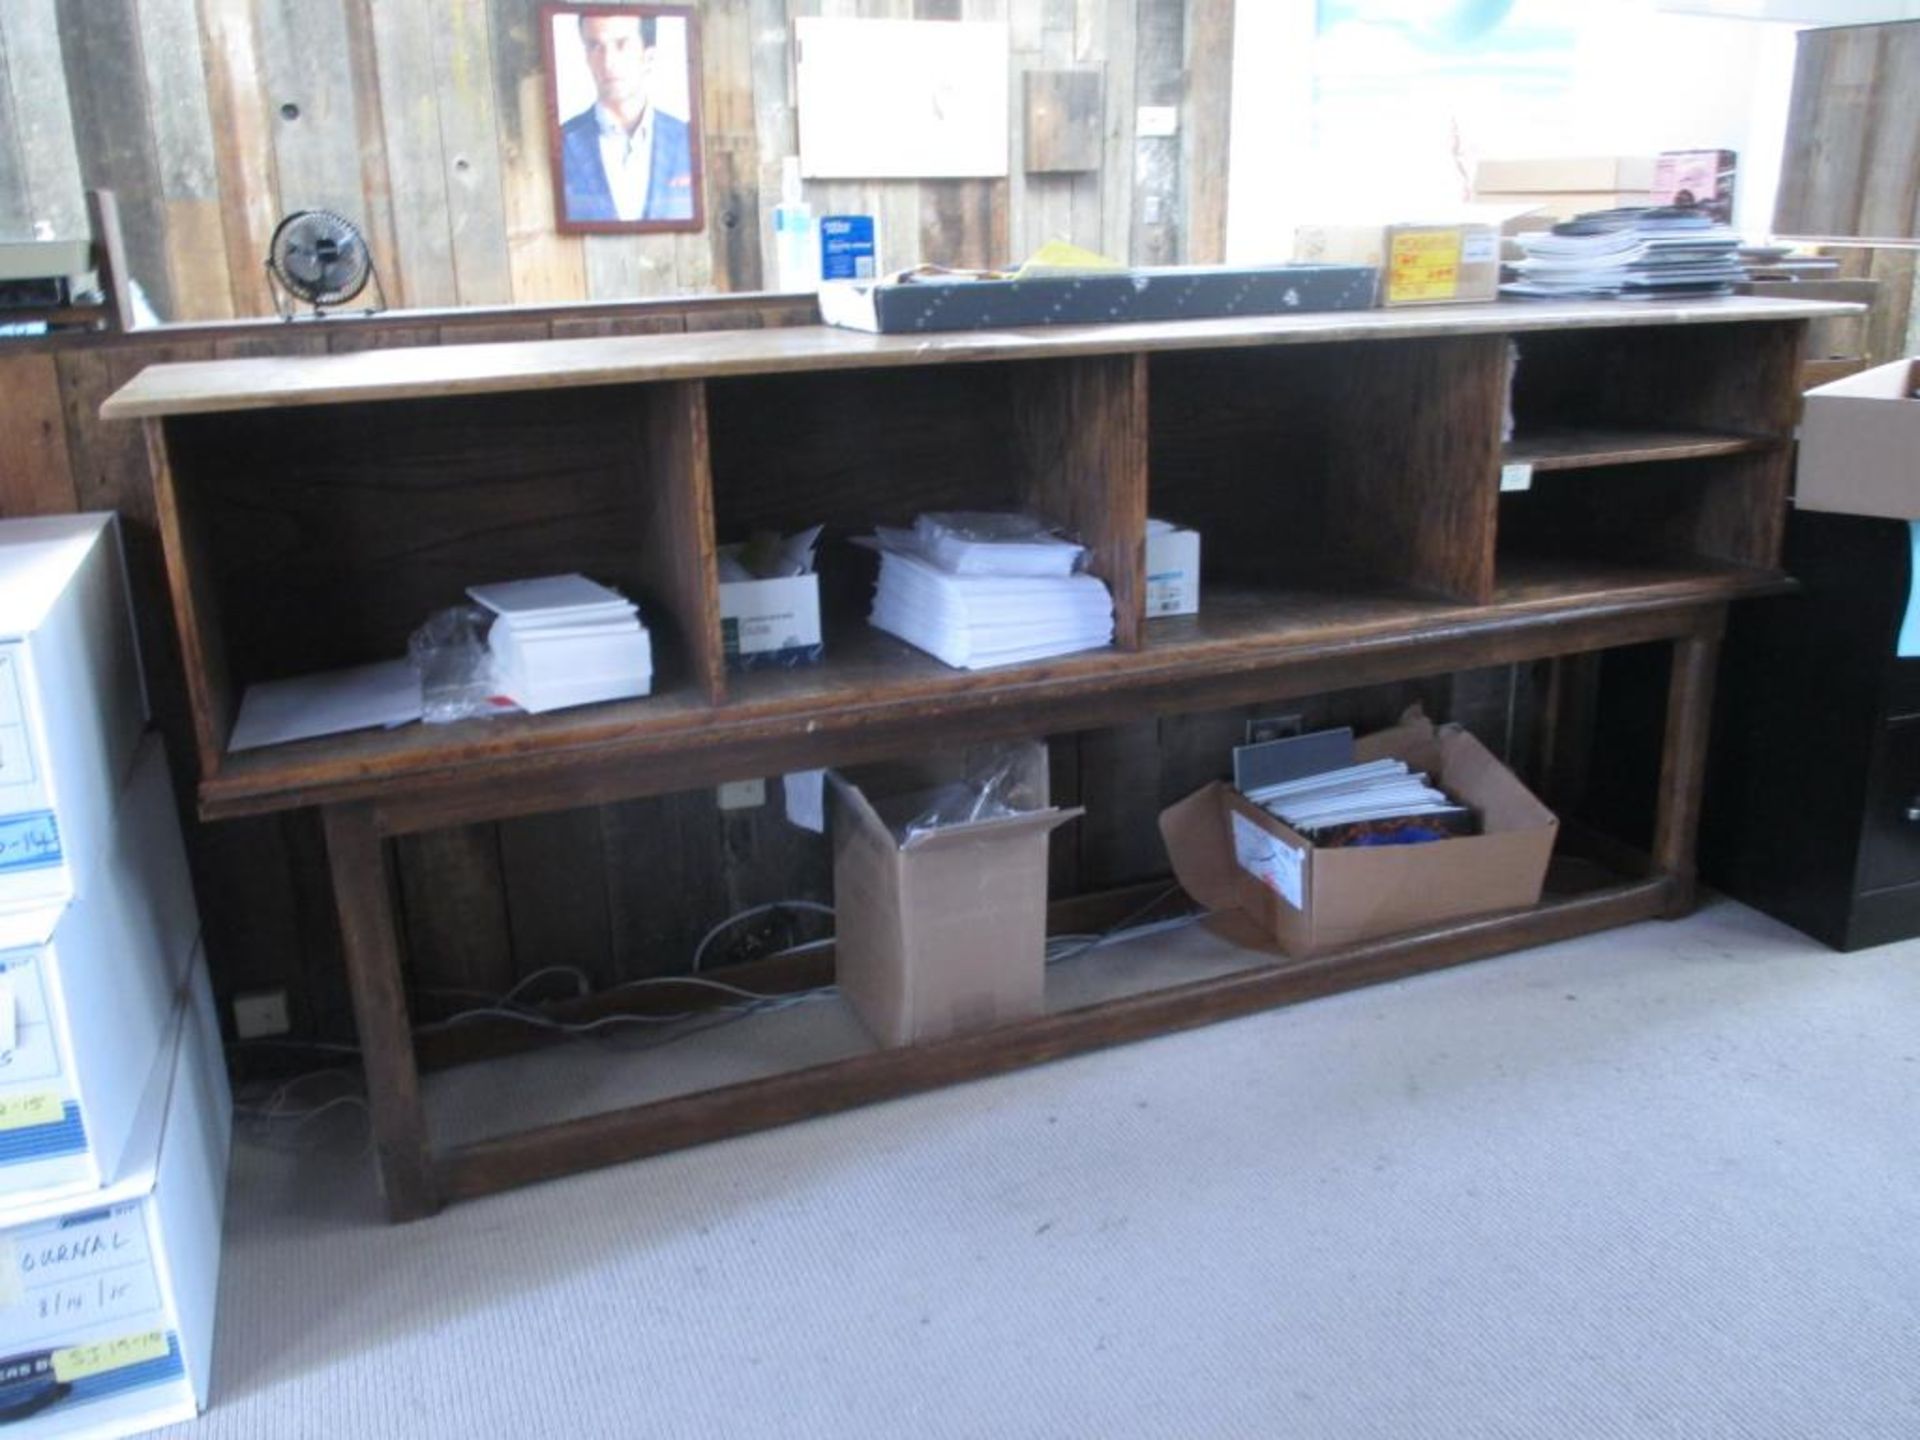 Table with Wood Storage Bins (2 Pcs). HIT# 2174448. Front Office. Asset Located at 2901 Salinas